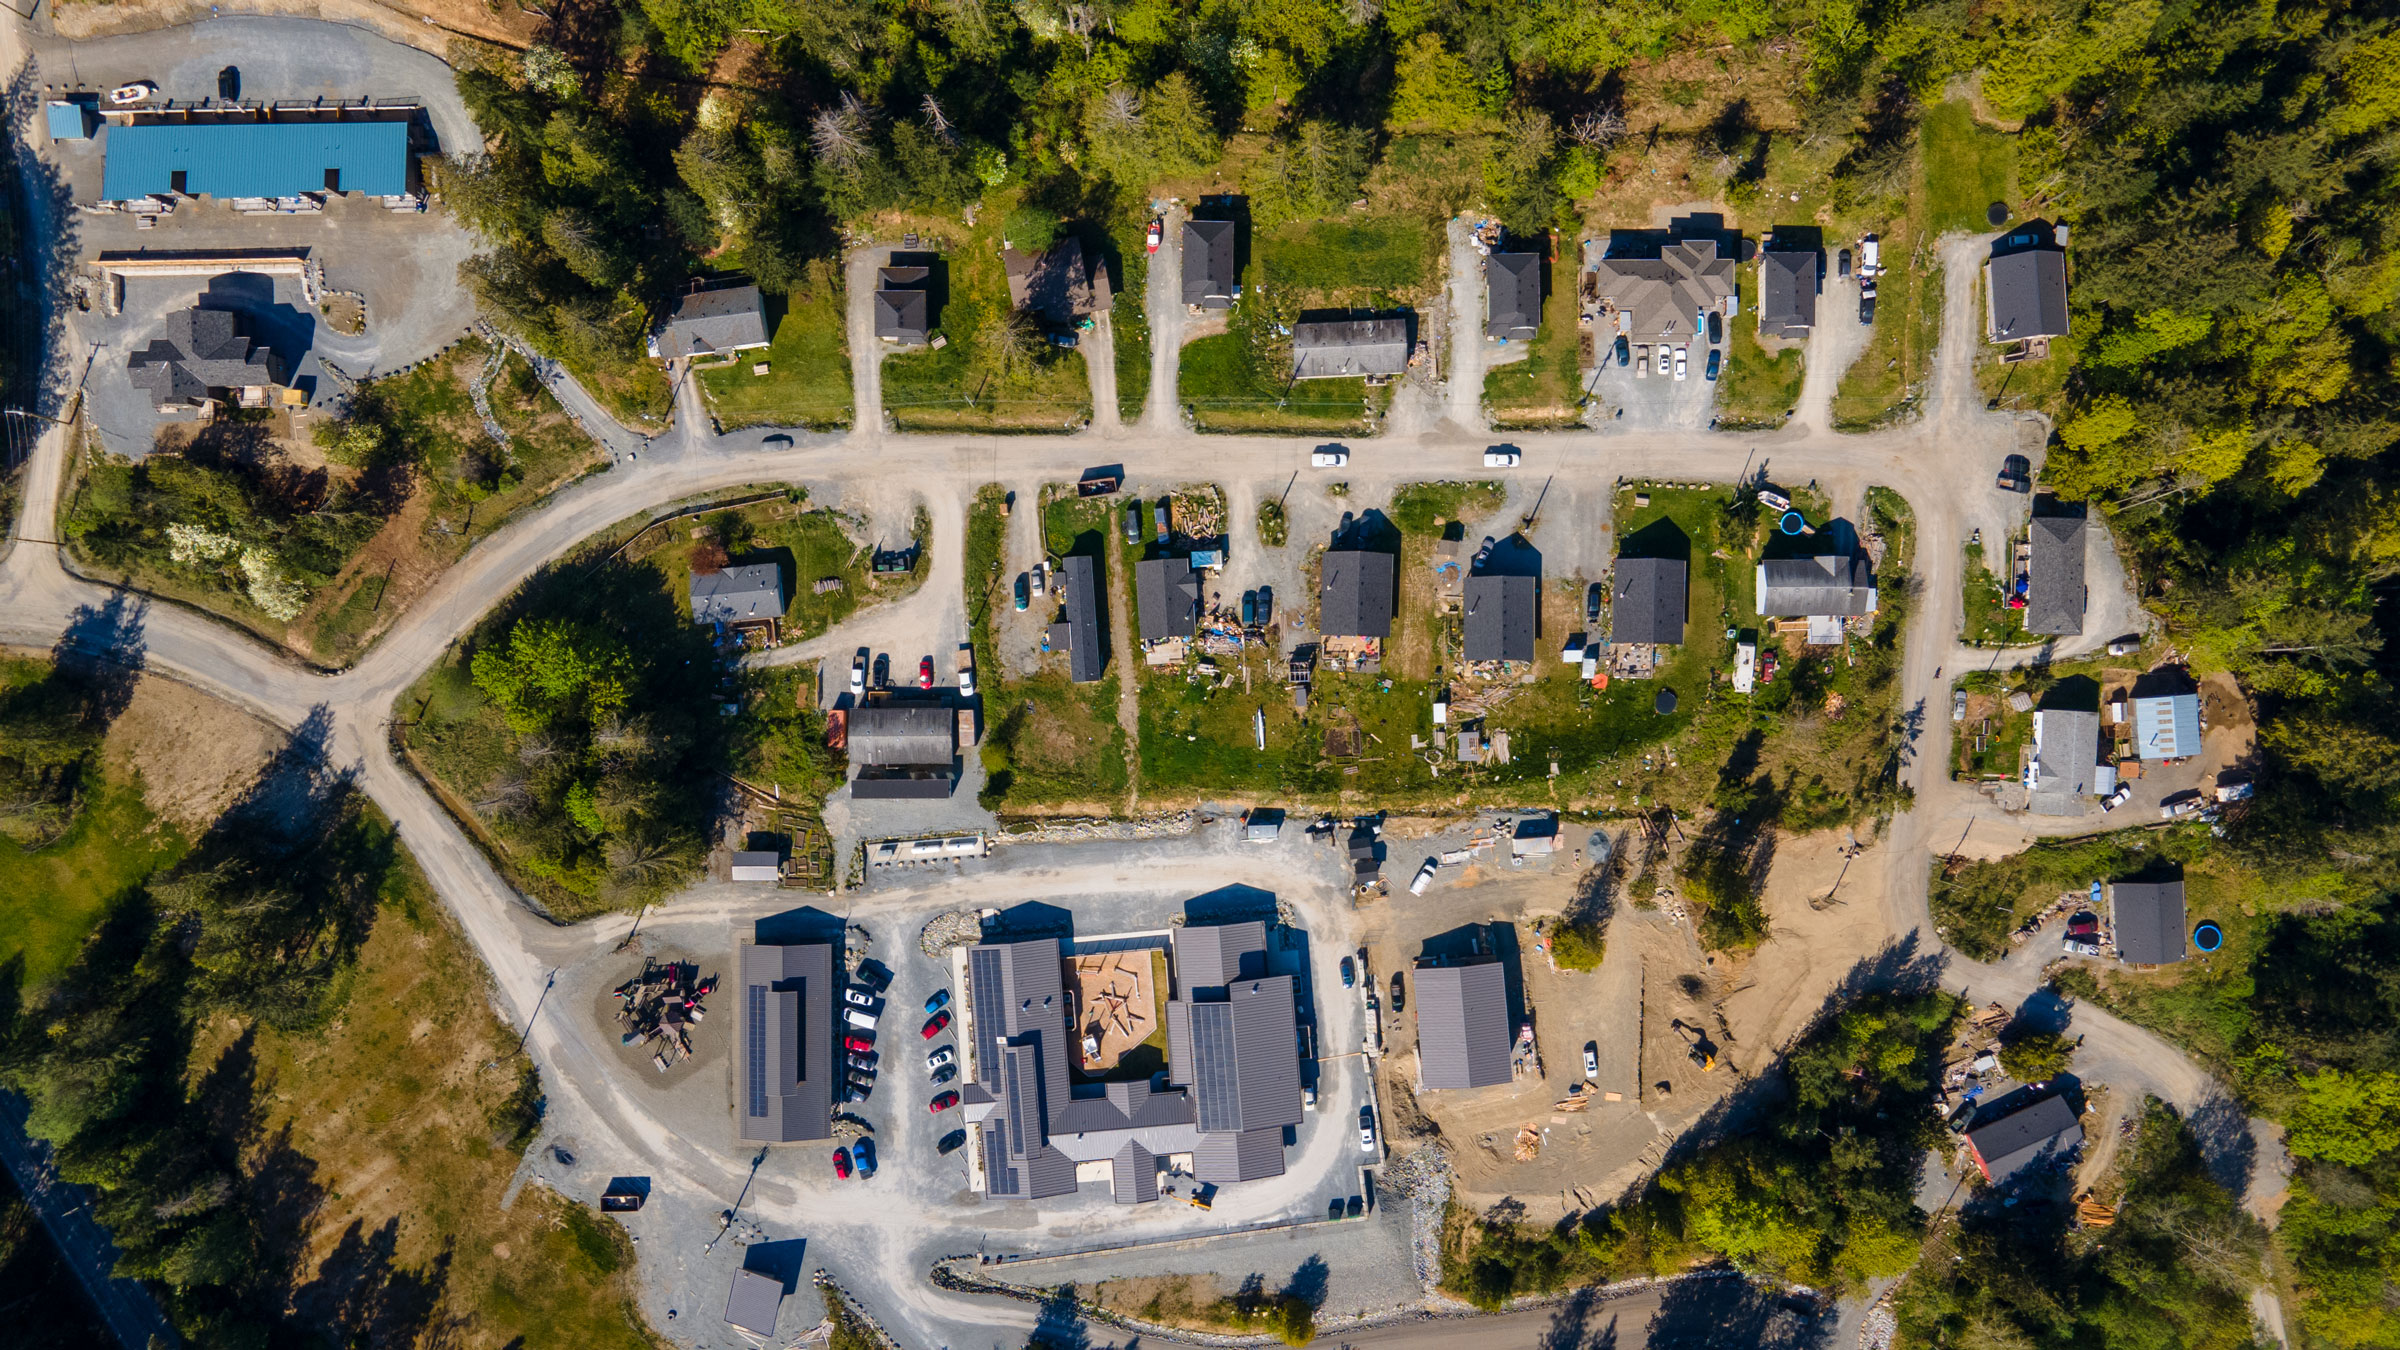 A drone overview of the upper community. Residences along the top and right edge, office buildings on the bottom.